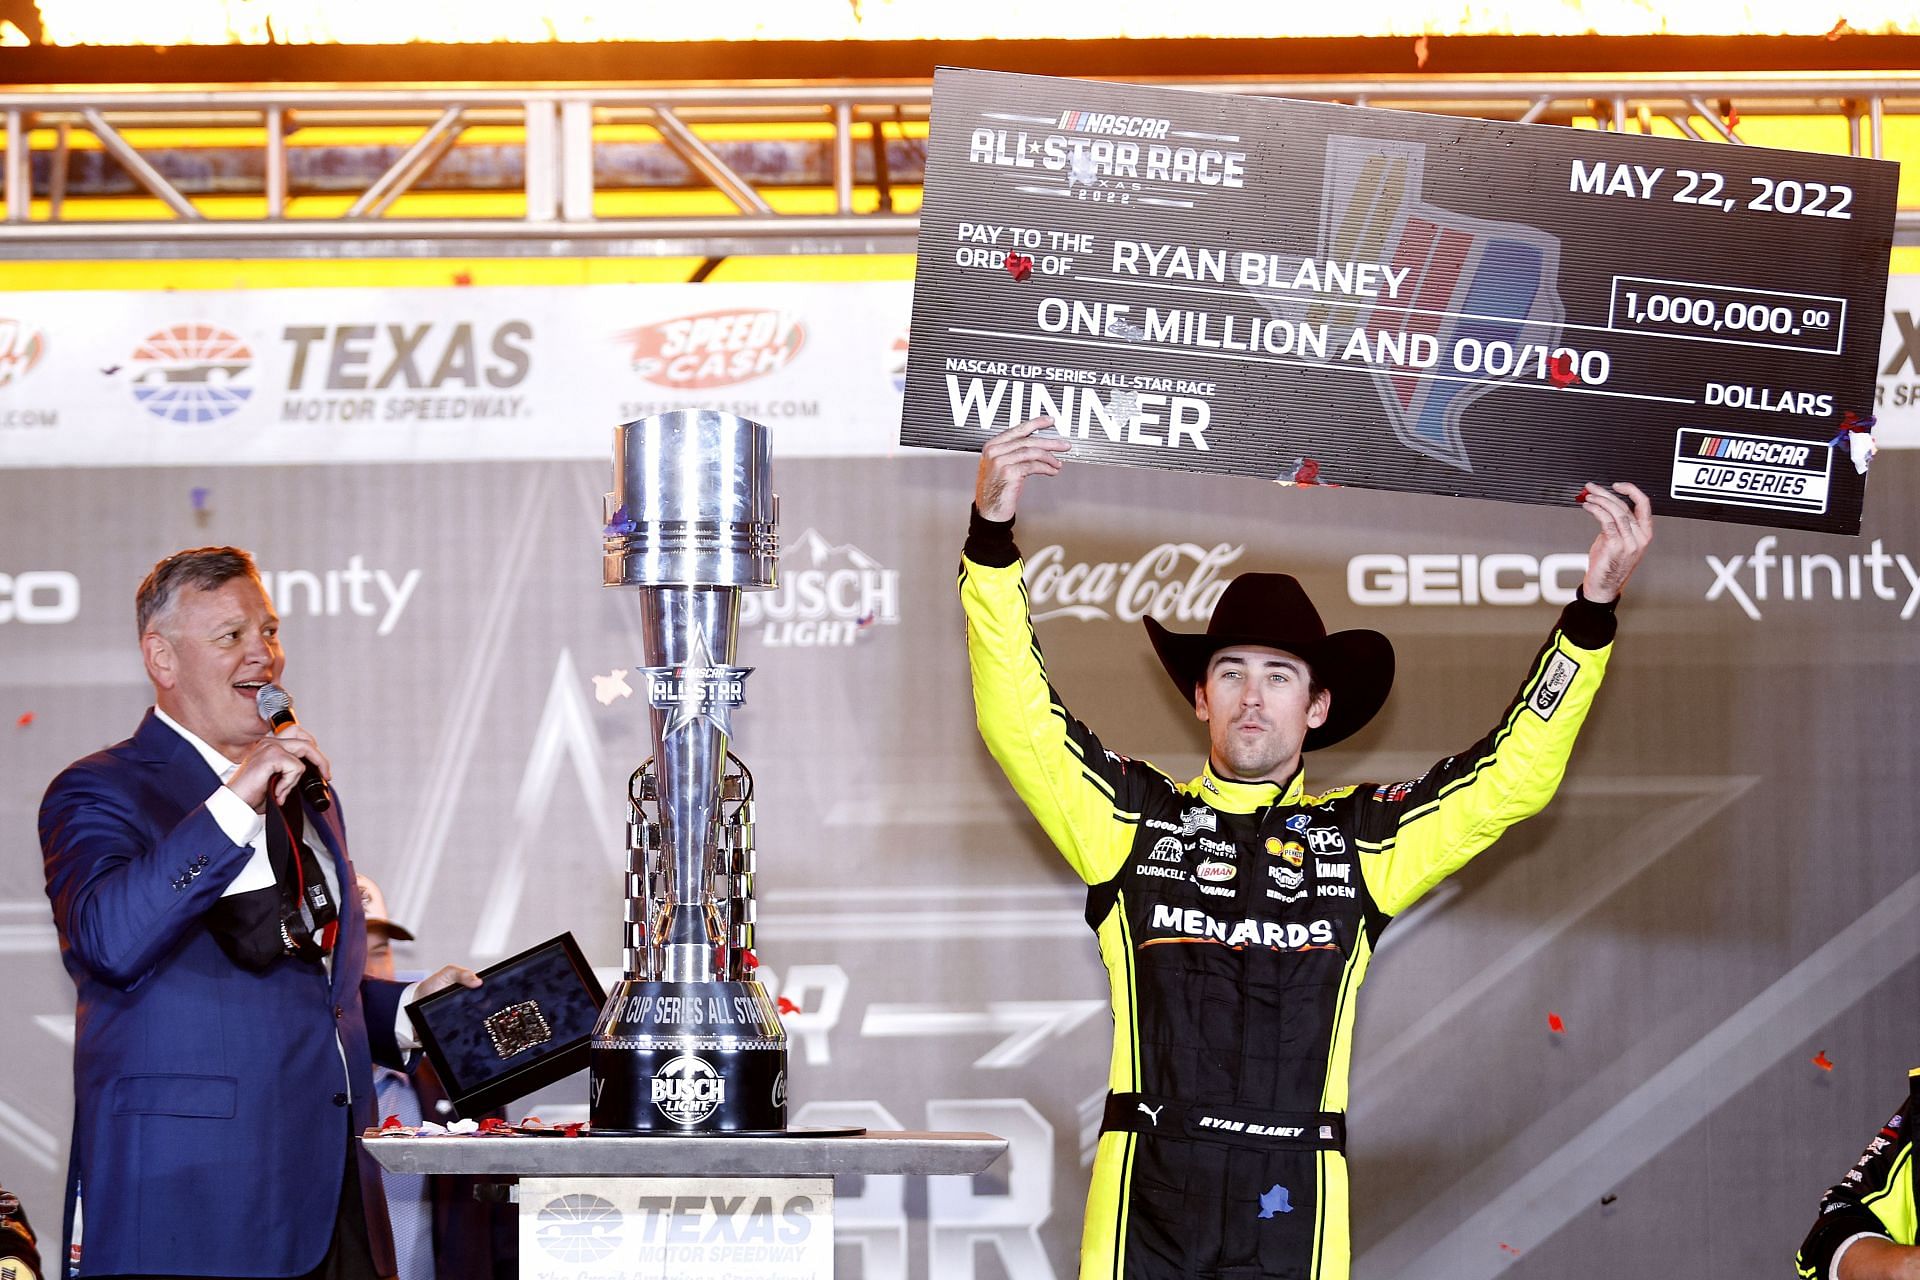 Ryan Blaney celebrates with the million dollar check in victory lane after winning the NASCAR Cup Series All-Star Race at Texas Motor Speedway (Photo by Chris Graythen/Getty Images)